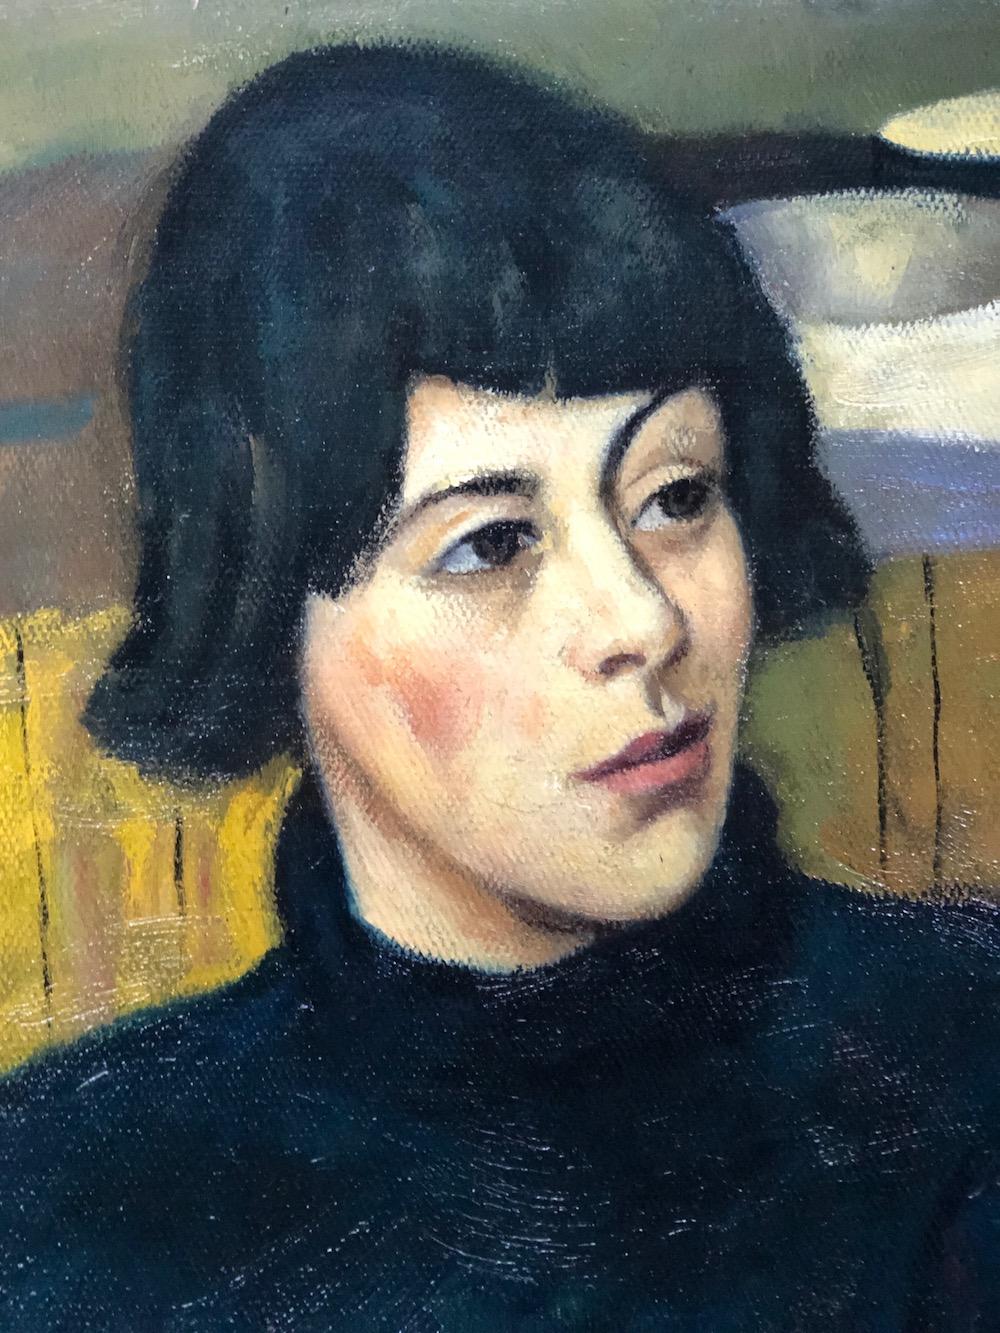 A striking portrait of a young woman by Alfred Aaron Wolmark executed in the 1930s in oil on canvas.
Uncomprimisily set in a domestic interior Wolmark captures the sitters pose with hints of fauvist pink and yellow, also using heavier brushmarks in